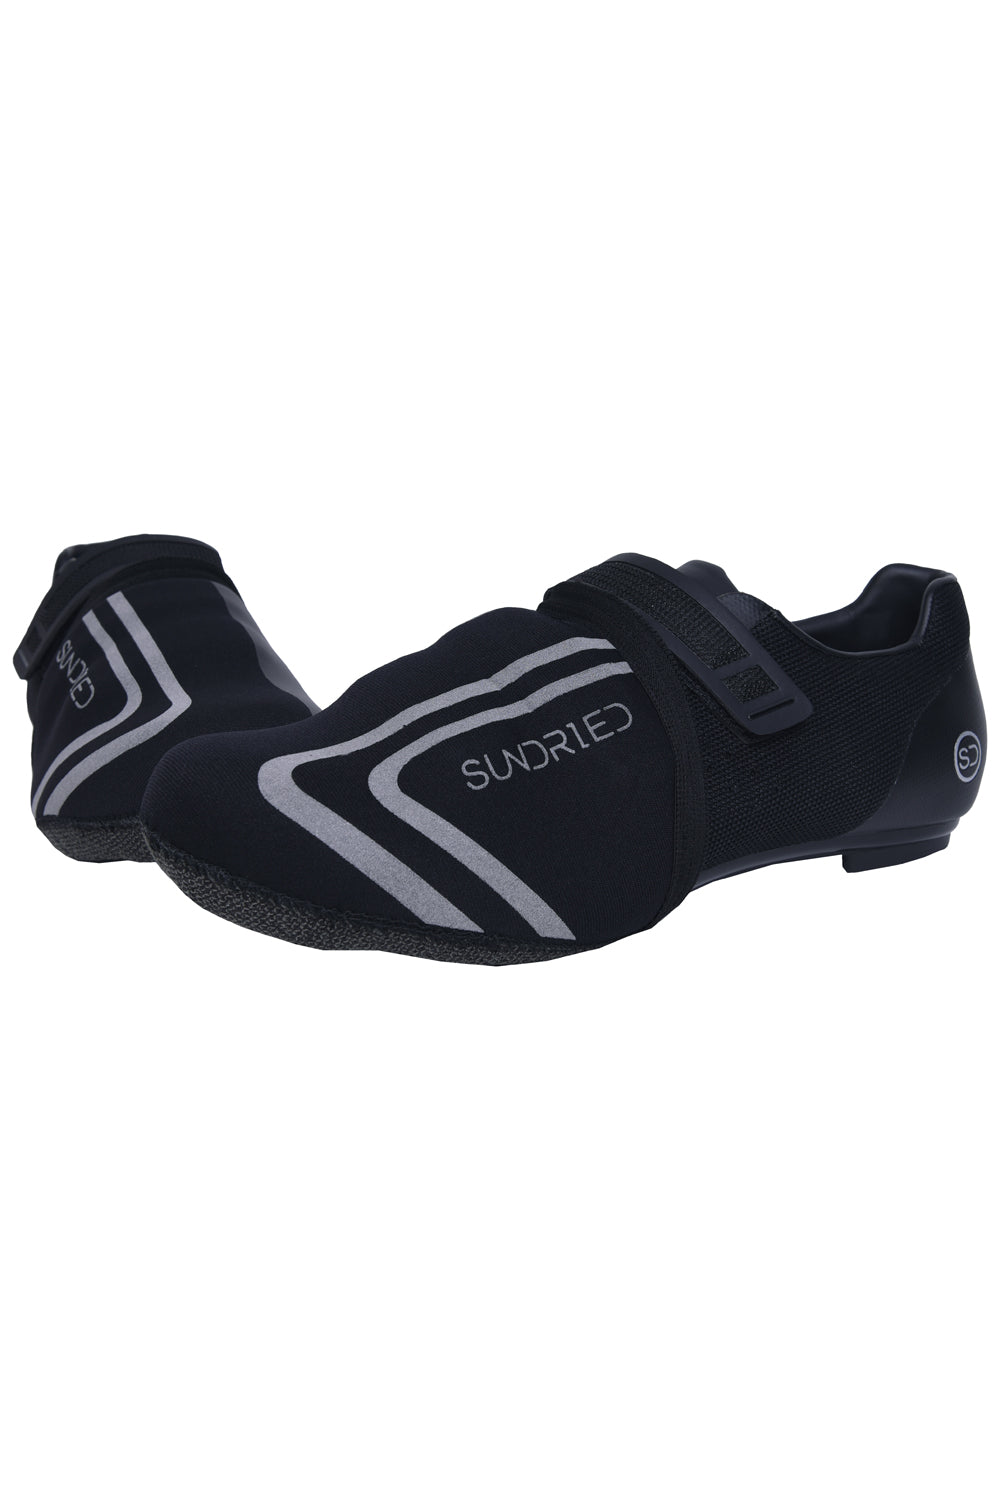 Sundried TC1 Heavy Duty Cycle Toe Covers Cover Activewear